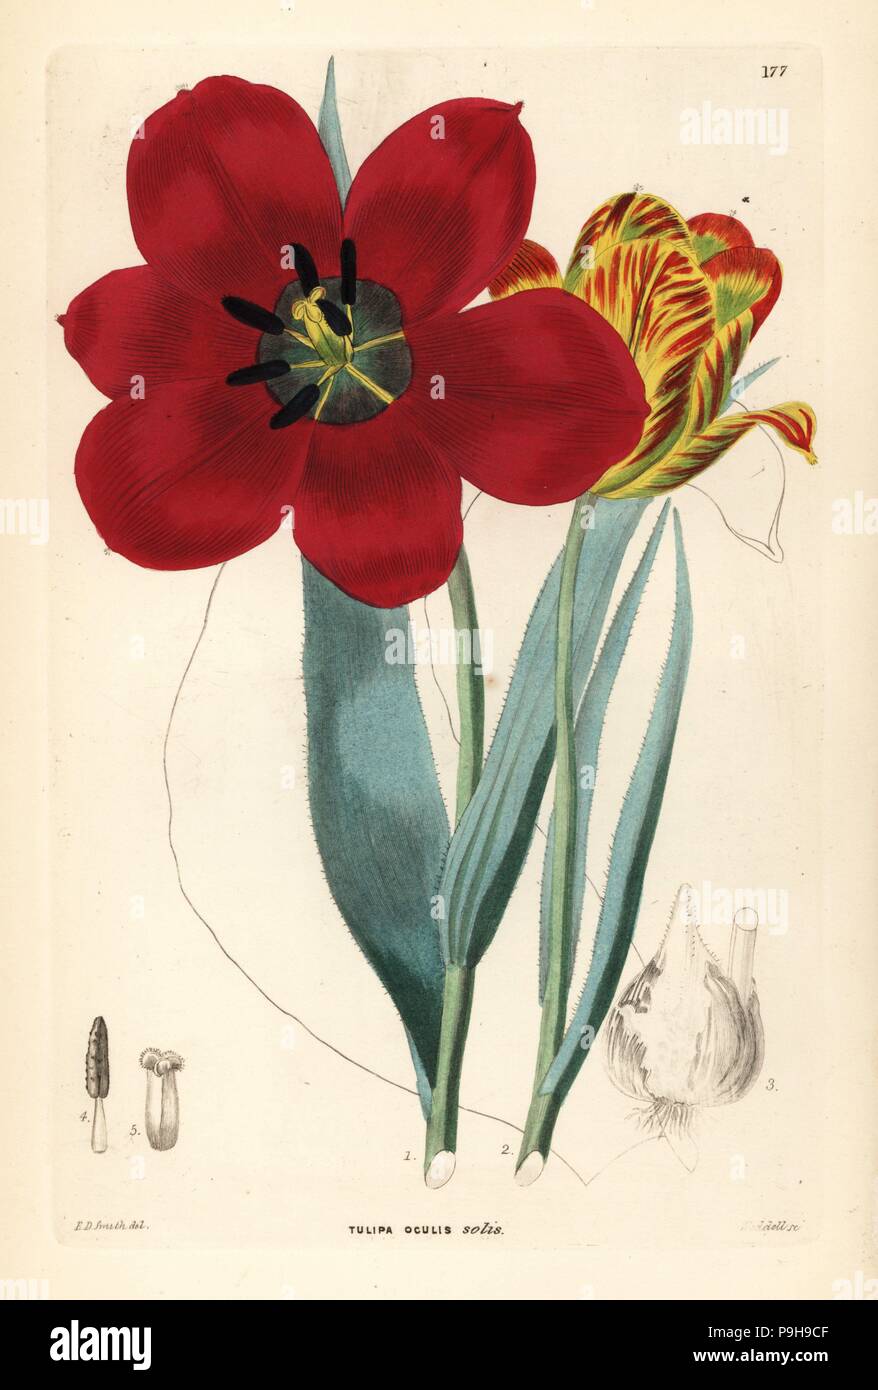 Tulipa agenensis (Sun's-eye tulip, Tulipa oculus-solis). Handcoloured copperplate engraving by Weddell after Edwin Dalton Smith from John Lindley and Robert Sweet's Ornamental Flower Garden and Shrubbery, G. Willis, London, 1854. Stock Photo